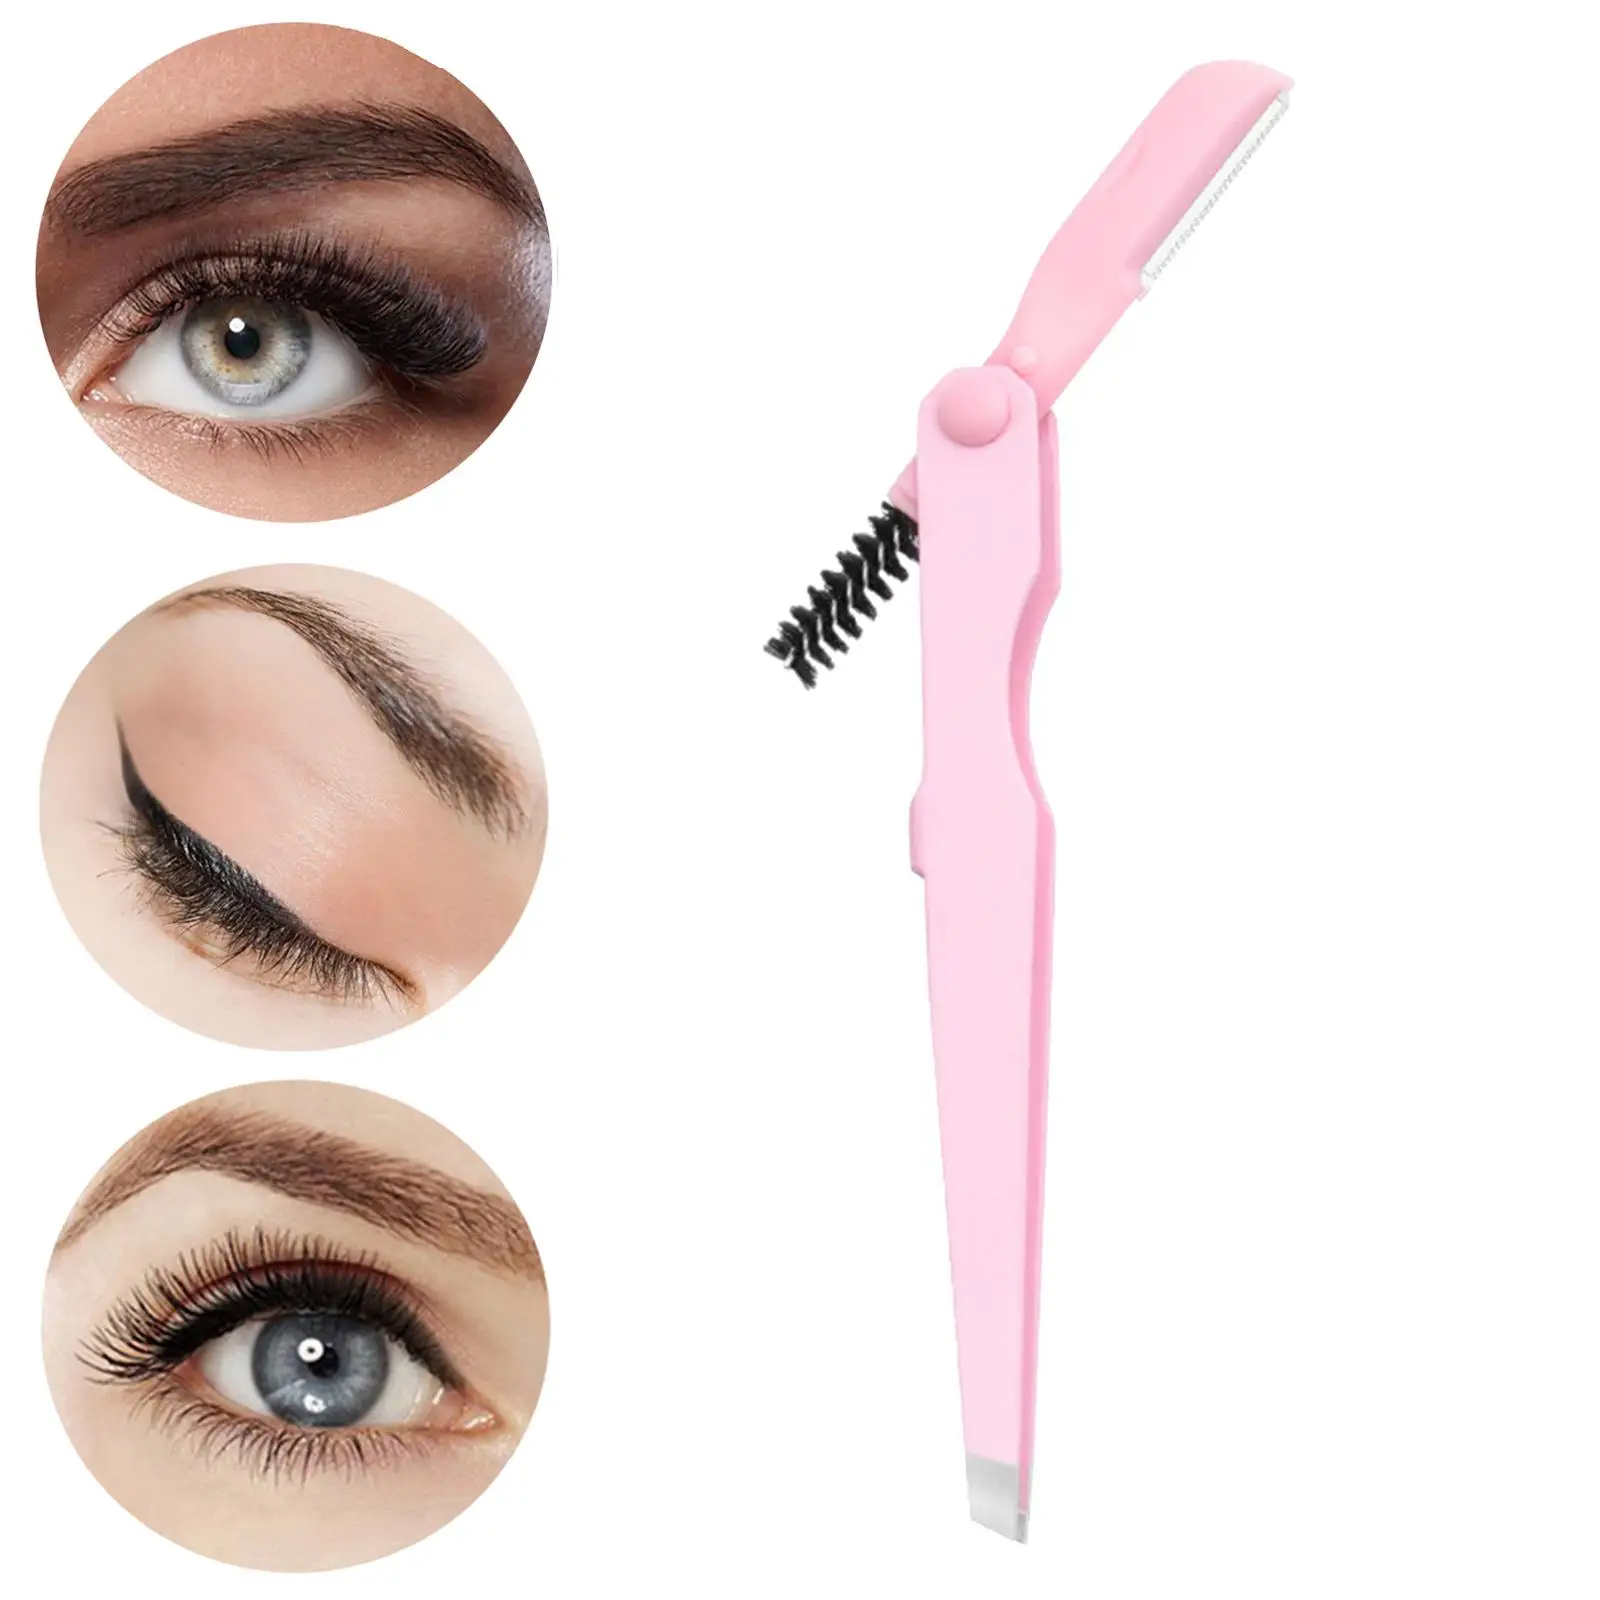 Eyebrow Tweezers Multipurpose Face Hair Remover Professional Eyebrow Trimming Comfortable Grip Brow Trimmer 3 in 1 Eyebrow Brush